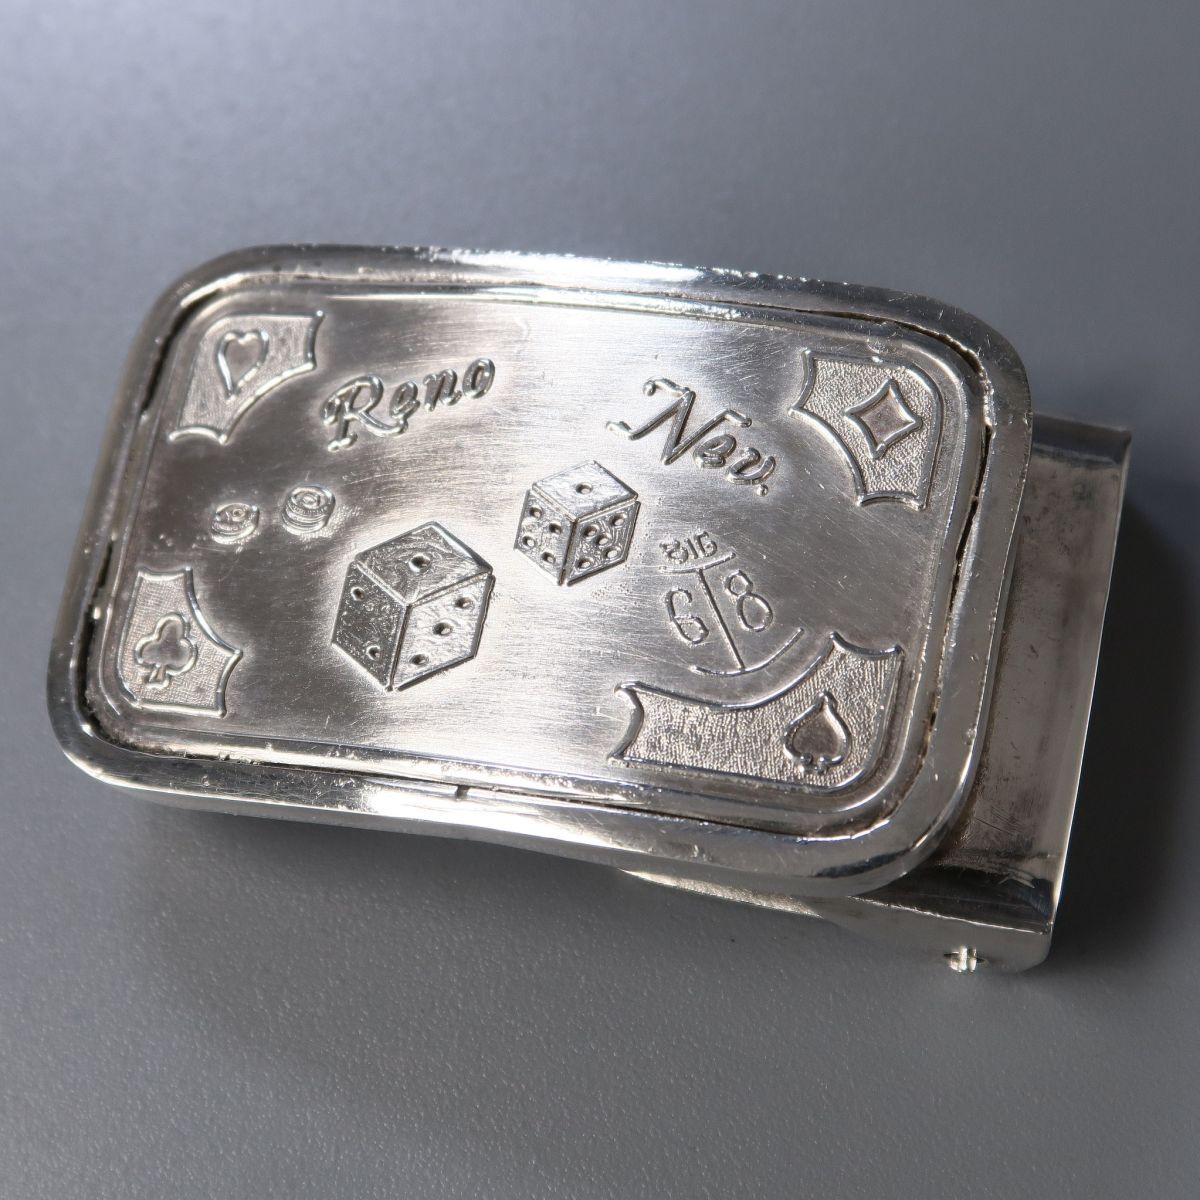 TG8615* silver original silver belt buckle stamp Mother Lode MINT ONE OUNCE.999 FINE SILVER dice rhinoceros koro gross weight :66.4g